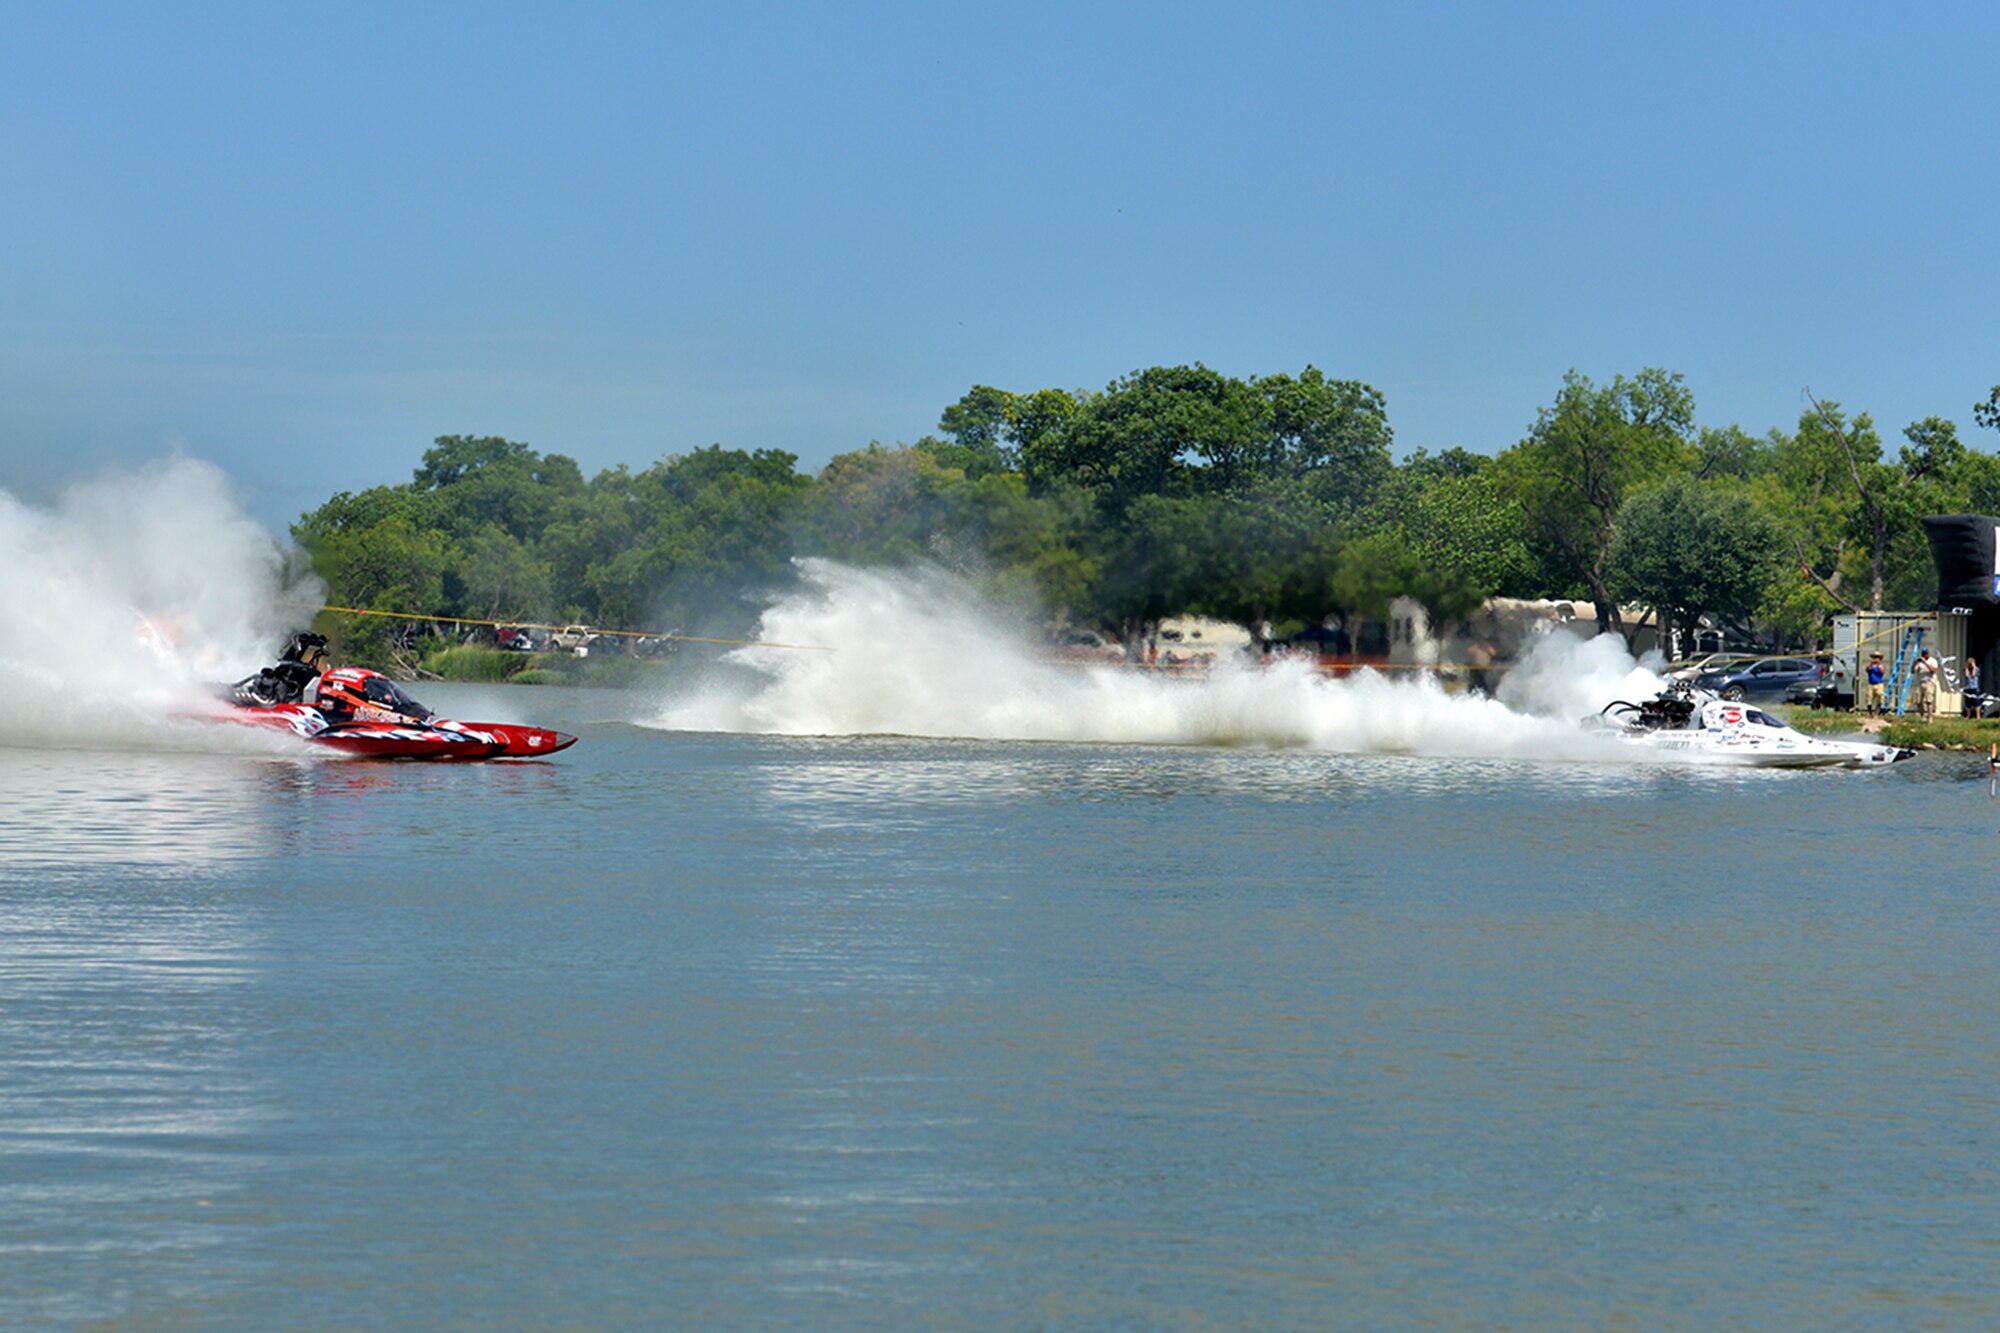 Drag boat drivers race in a liquid quarter mile during the 2016 Showdown in San Angelo Super Nationals drag boat races at Lake Nasworthy, San Angelo, Texas, June 25, 2016. The Showdown brings in people from around the nation and the Goodfellow volunteers ensure that the lake was kept clean. (U.S. Air Force photo by Airman 1st Class Randall Moose/Released)